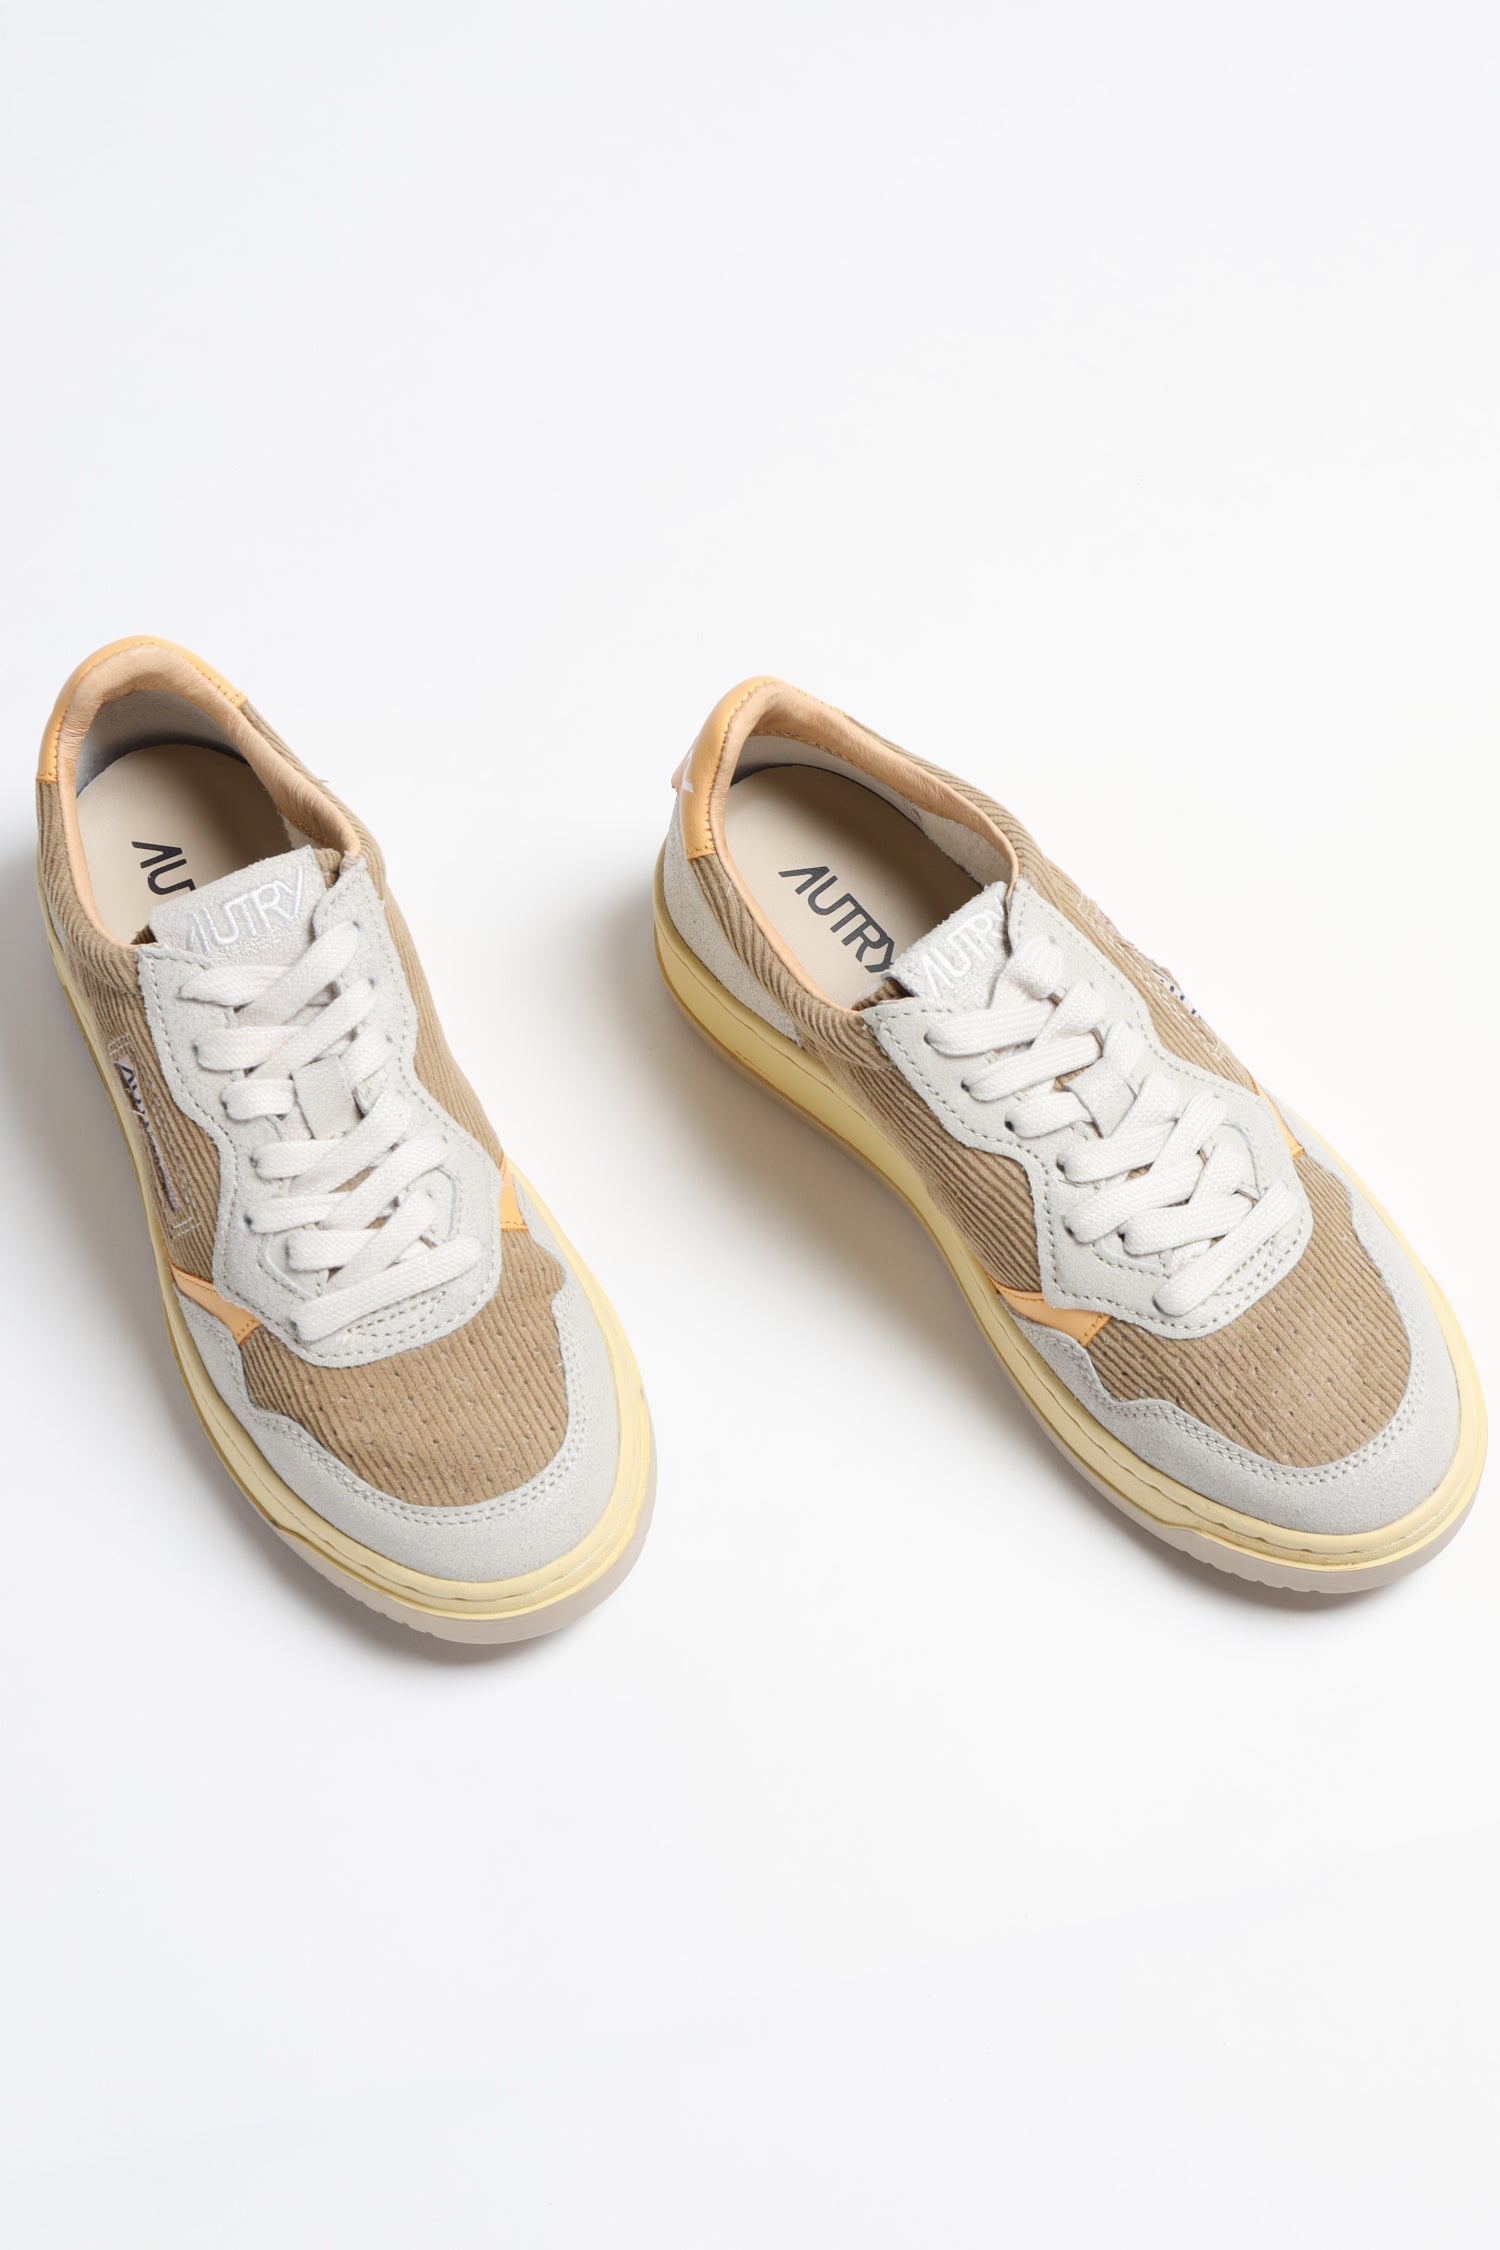 Sneaker 01 Low Cord in Taupe/OrangeAutry - Anita Hass